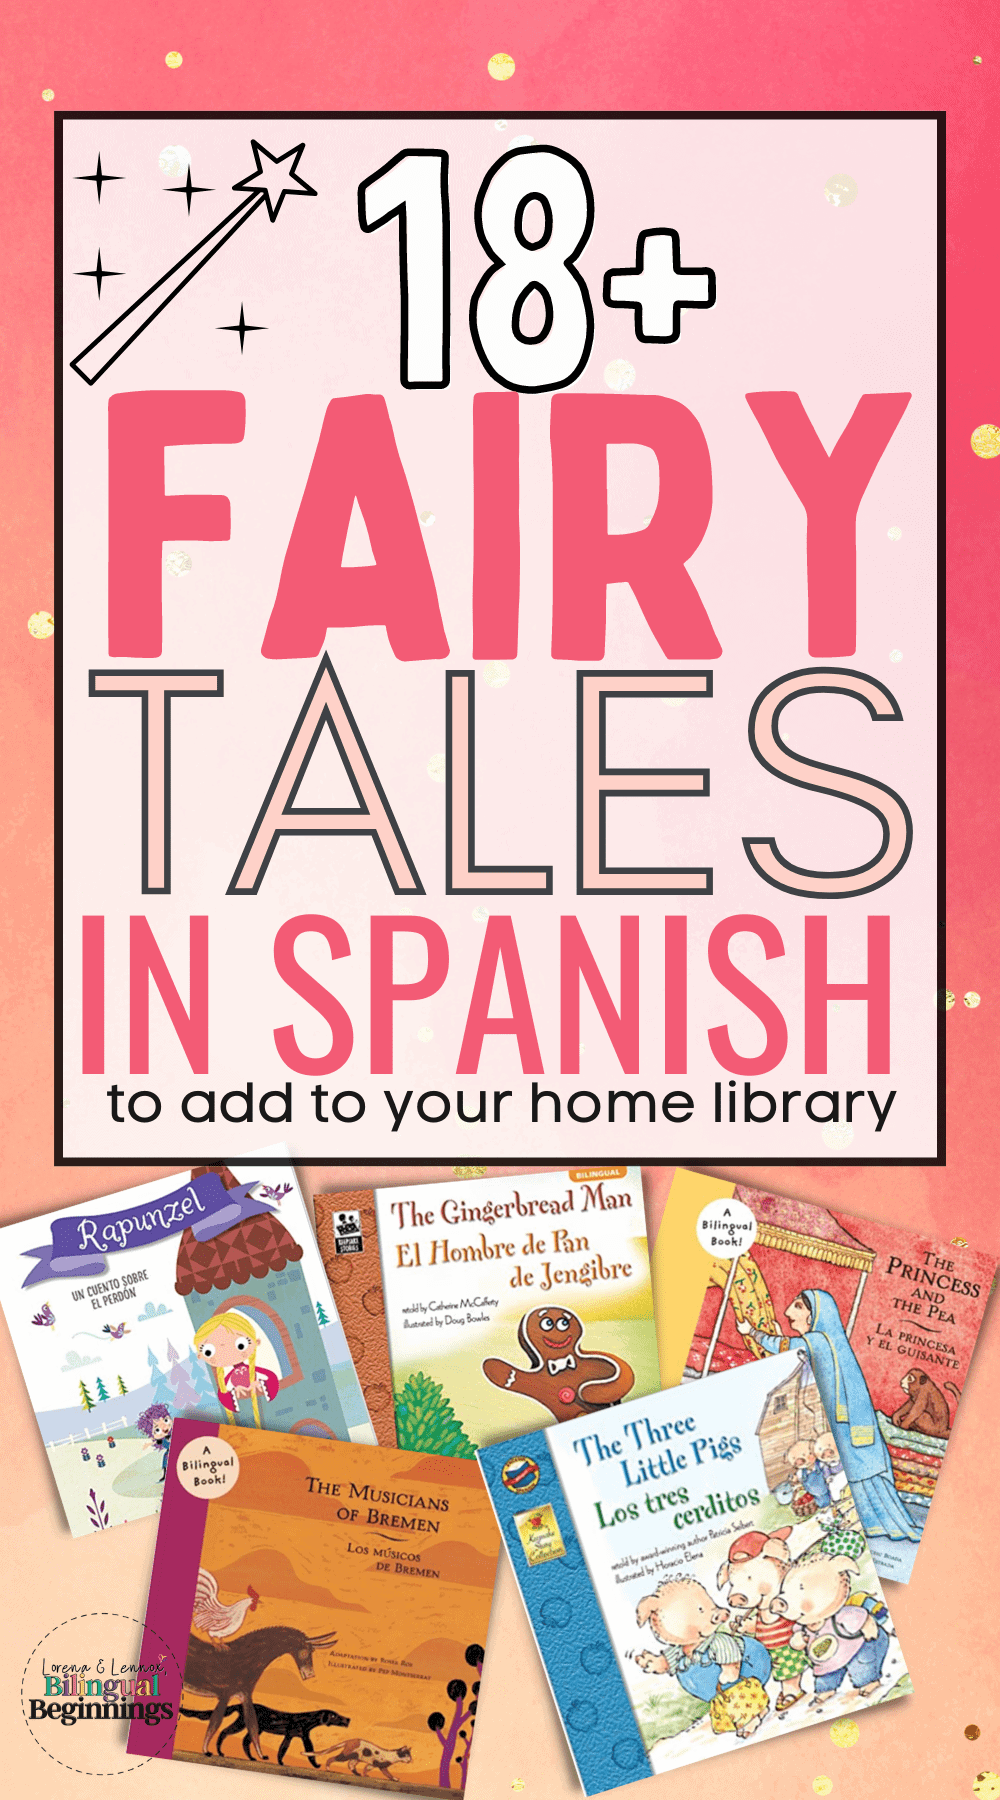 18+ Fairy Tales in Spanish to add to your home library.